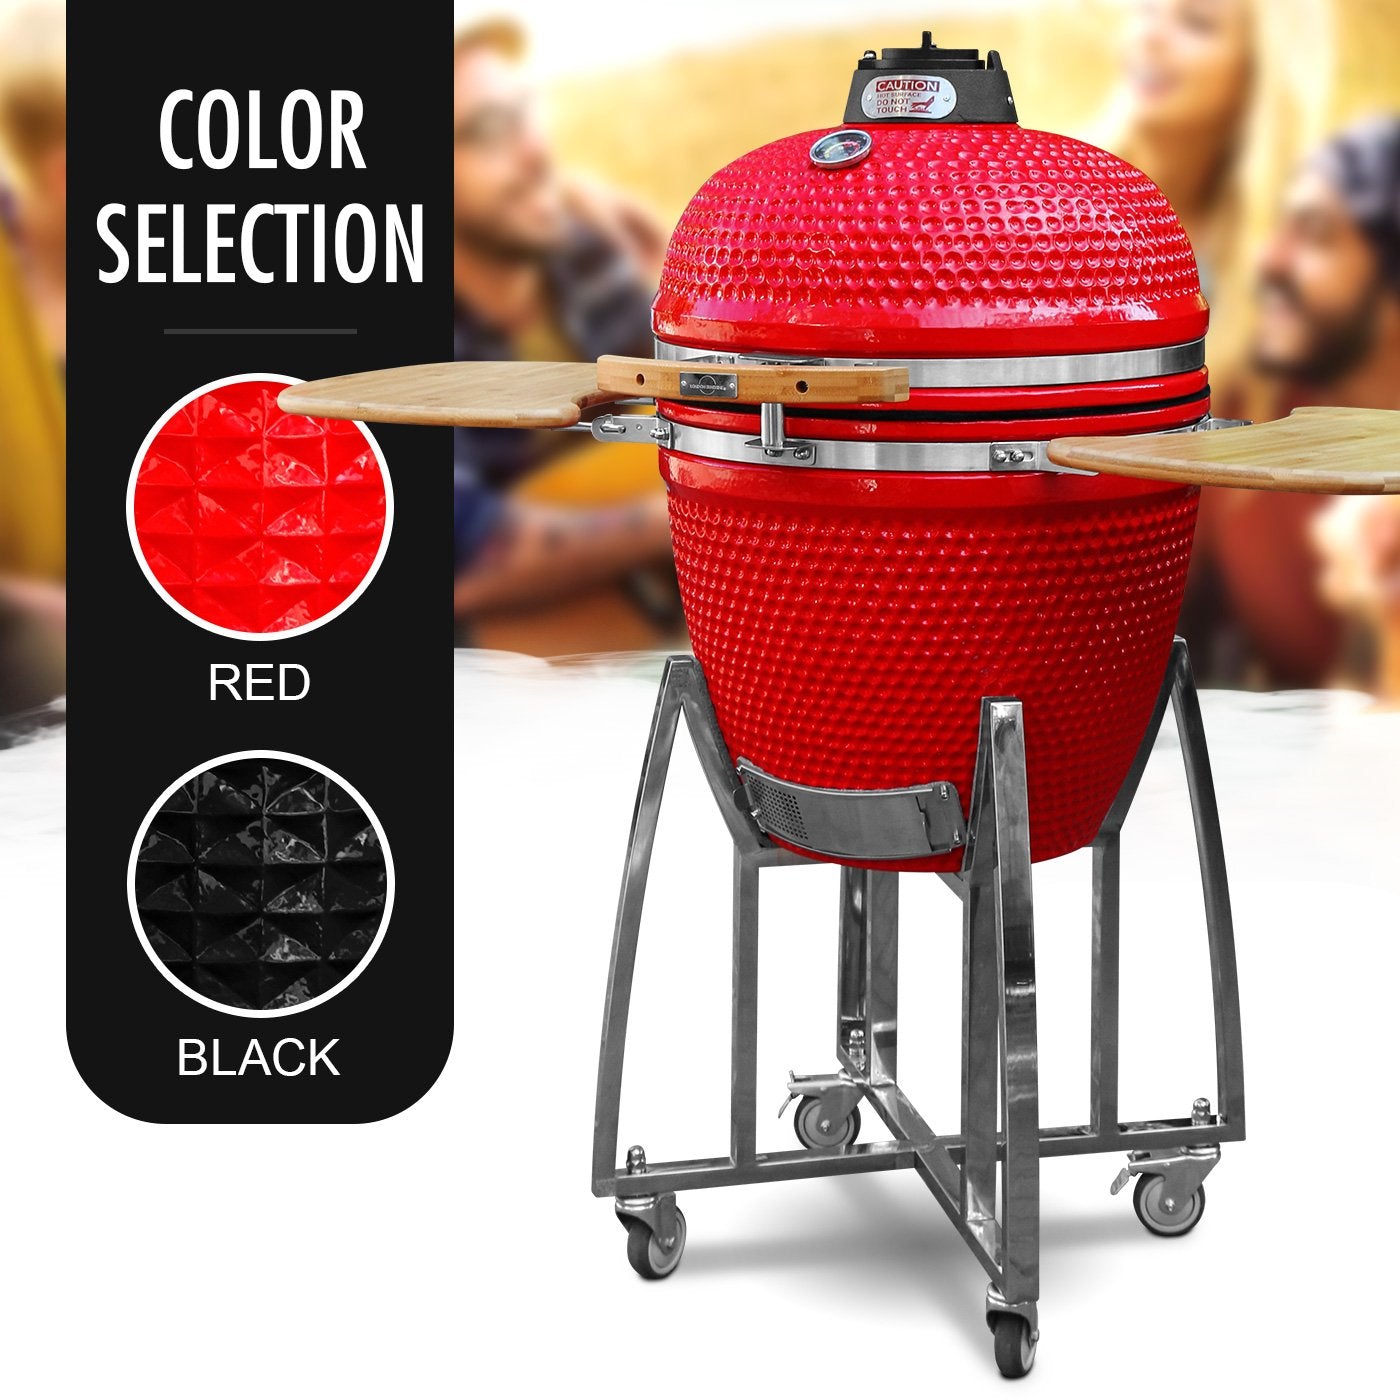 Ceramic 18″ Kamado BBQ Smoker Grill with Stand and Bamboo Sideboard - Colors: Red/Black/Orange/Green